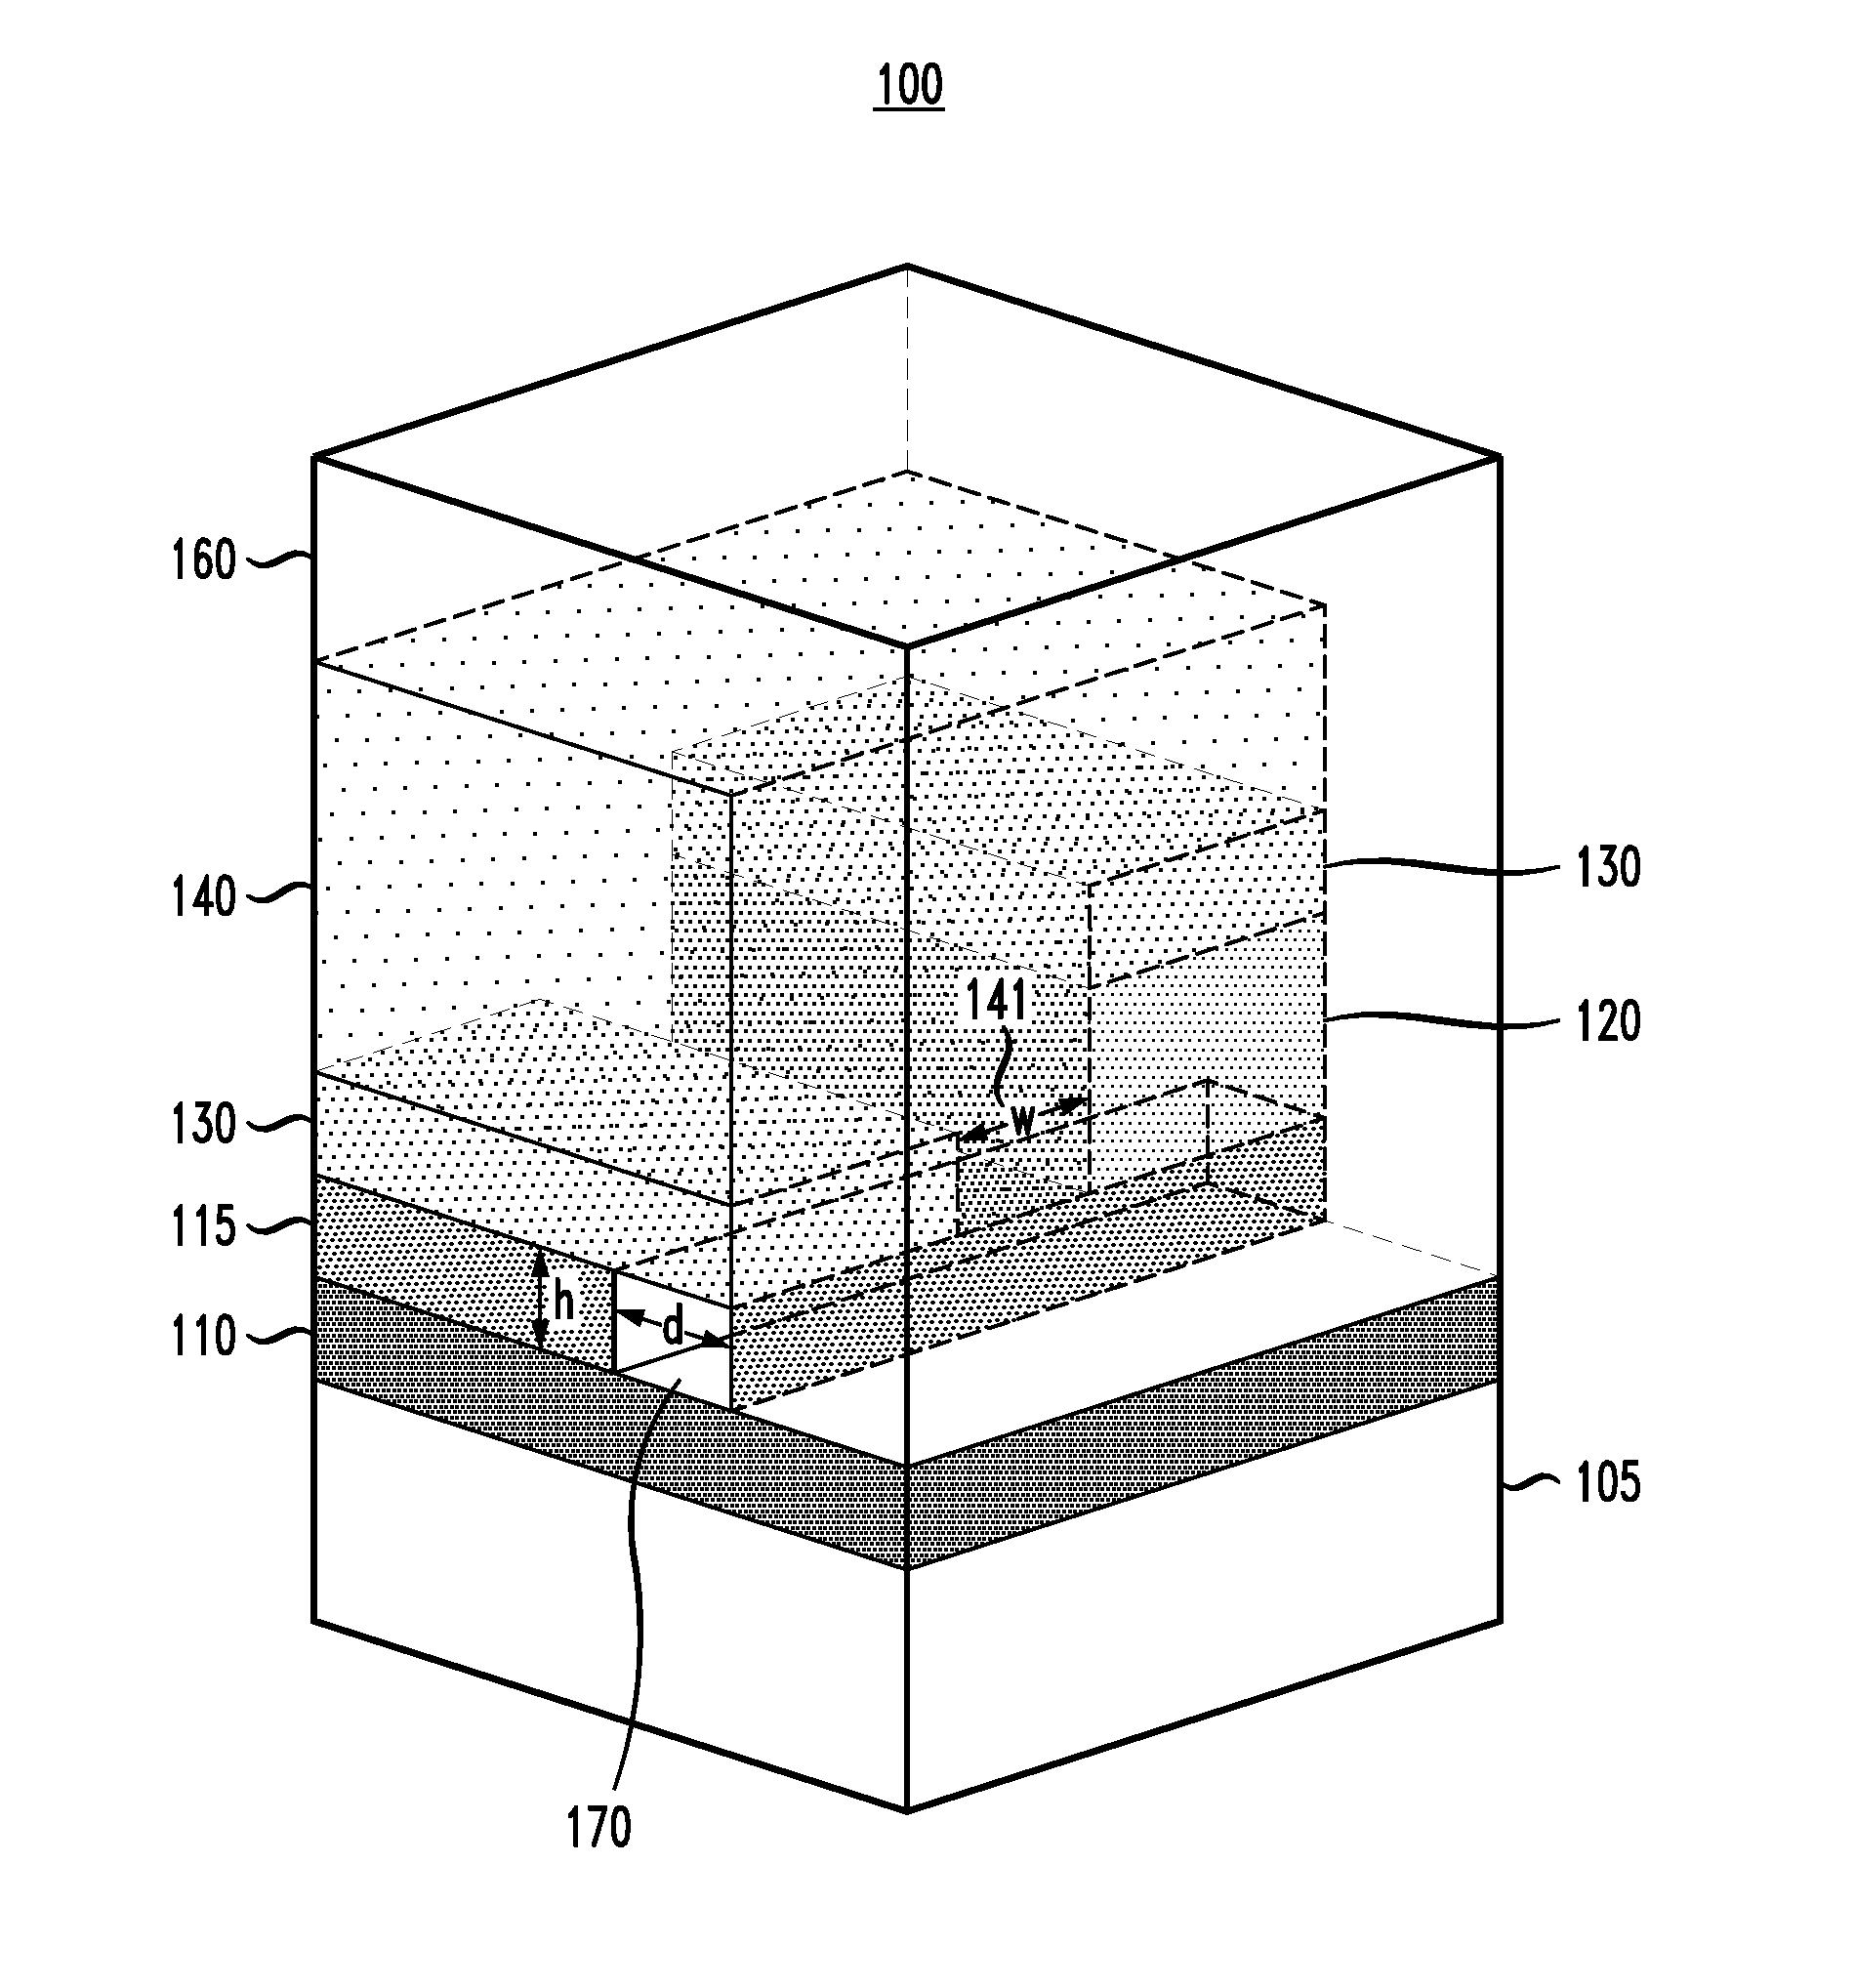 Semiconductor devices having nanochannels confined by nanometer-spaced electrodes